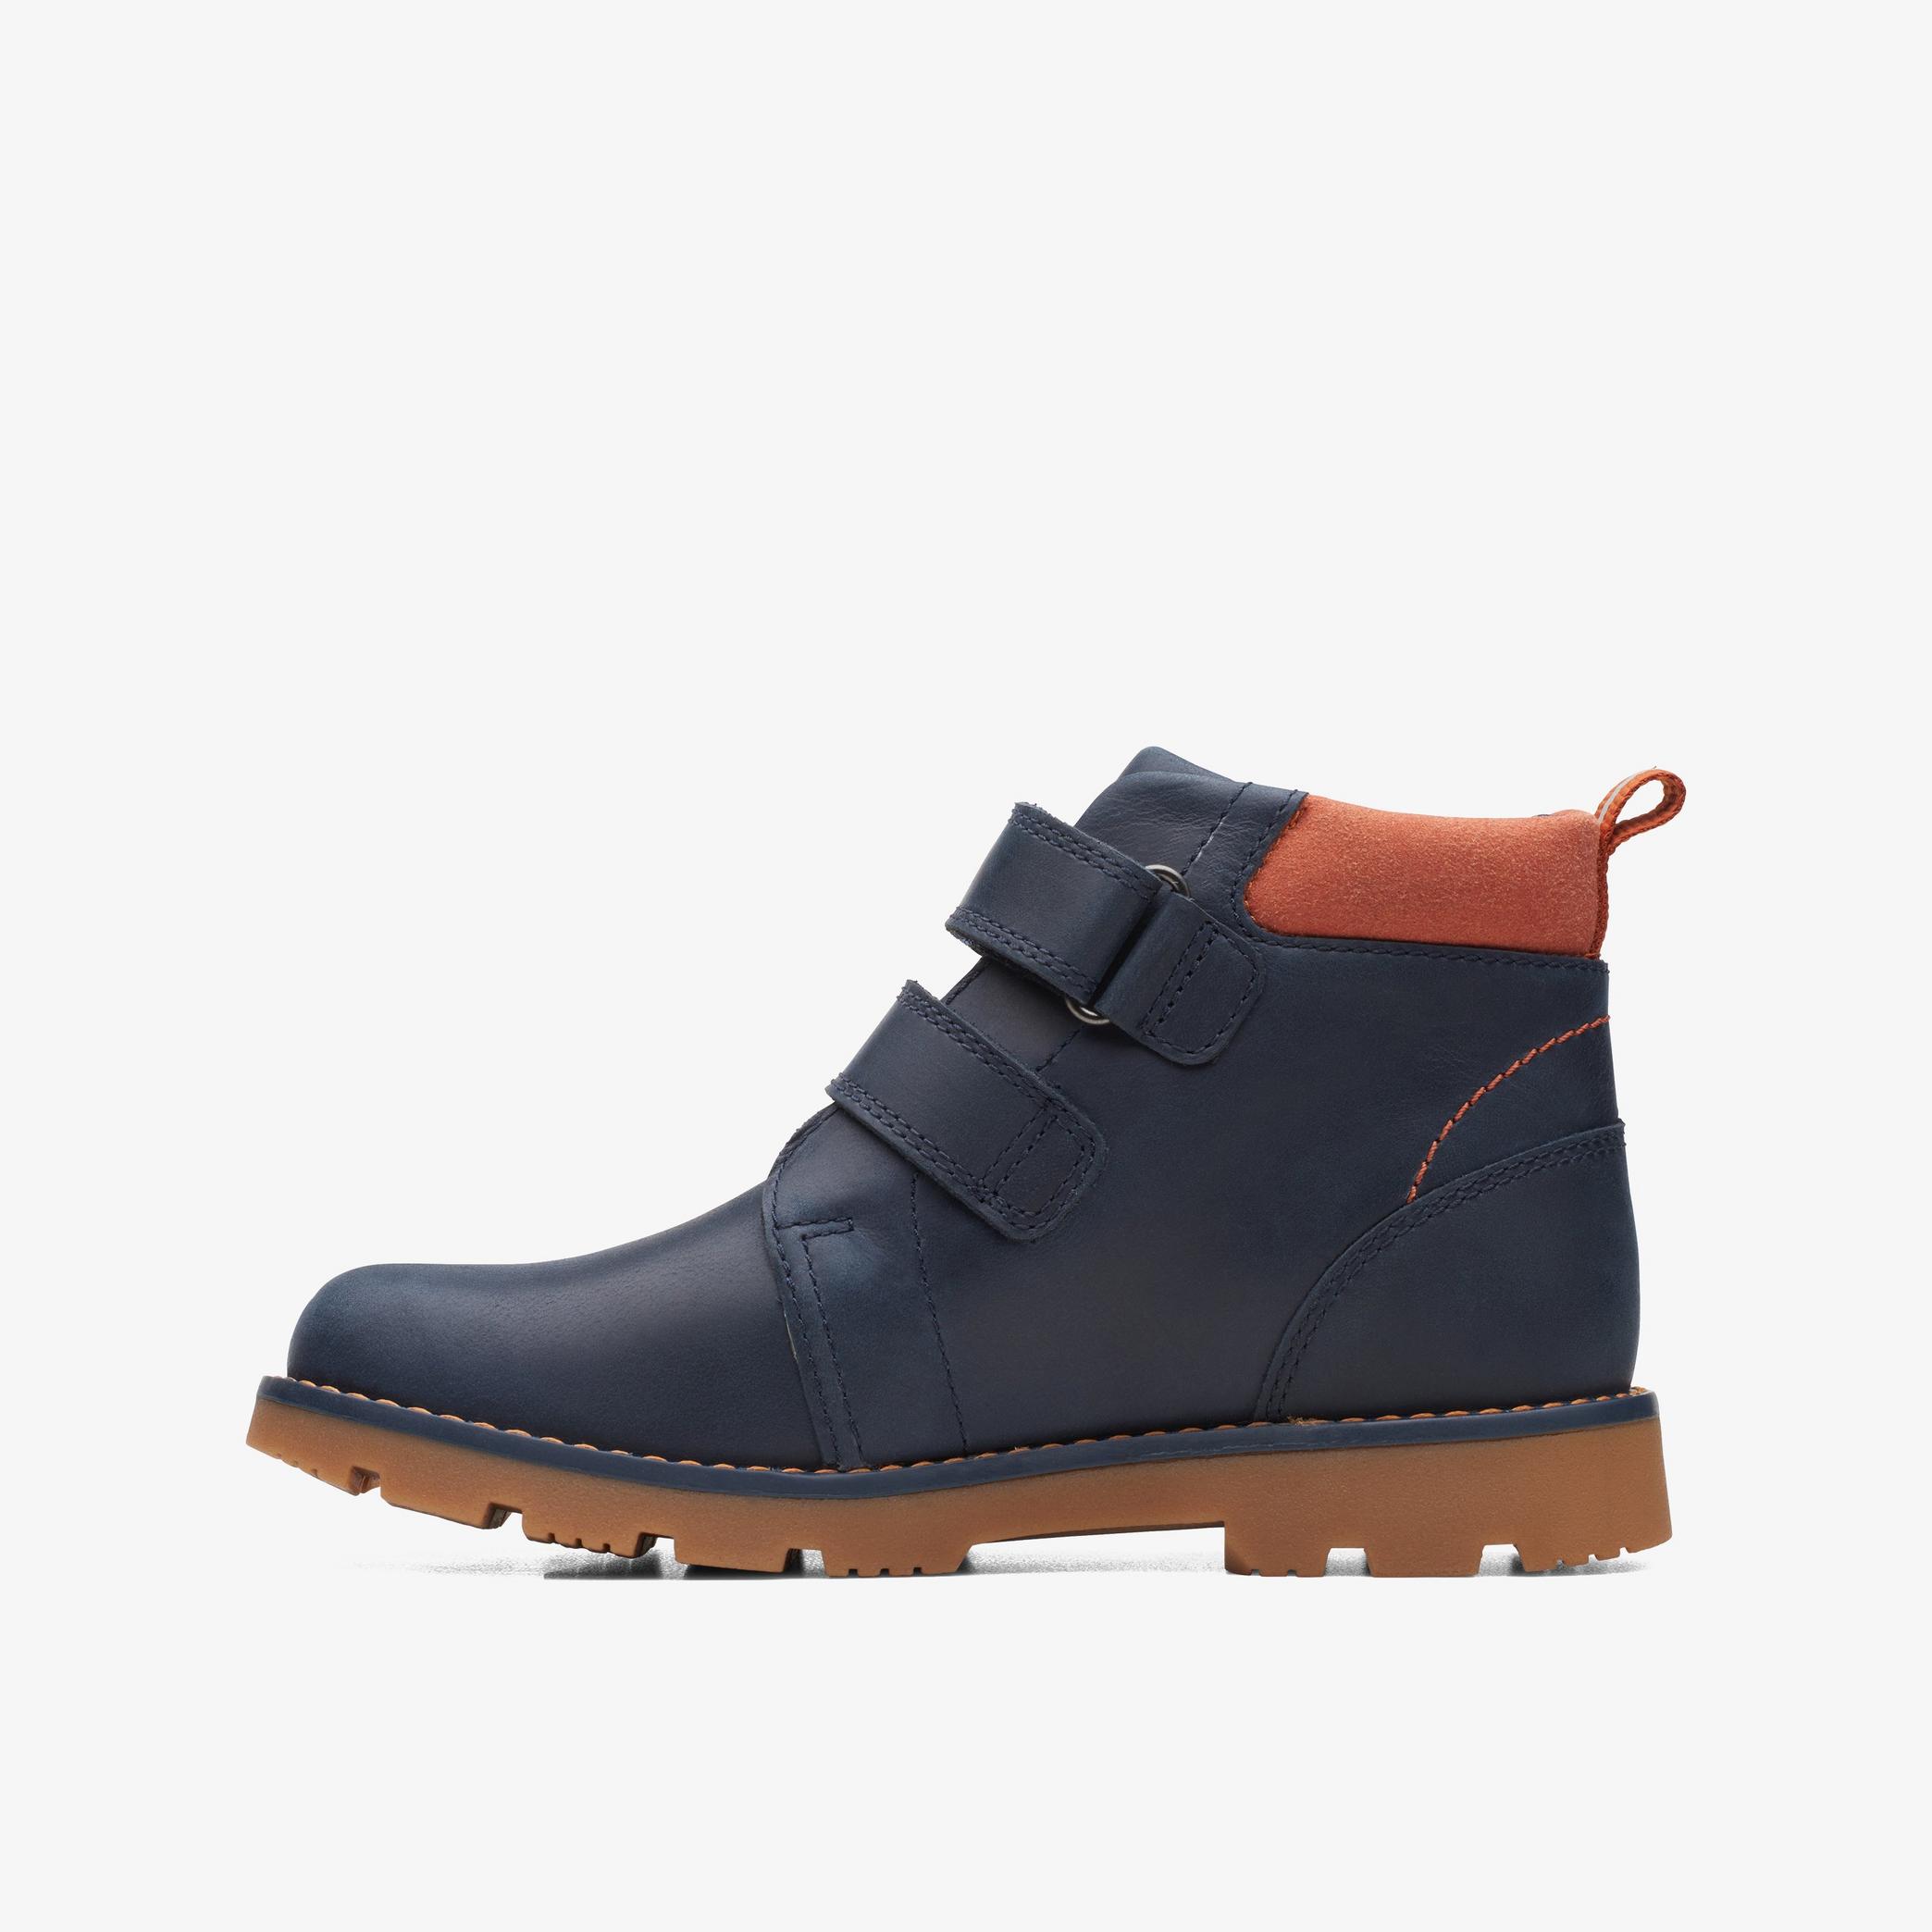 Heath Strap Kid Navy Ankle Boots, view 2 of 6